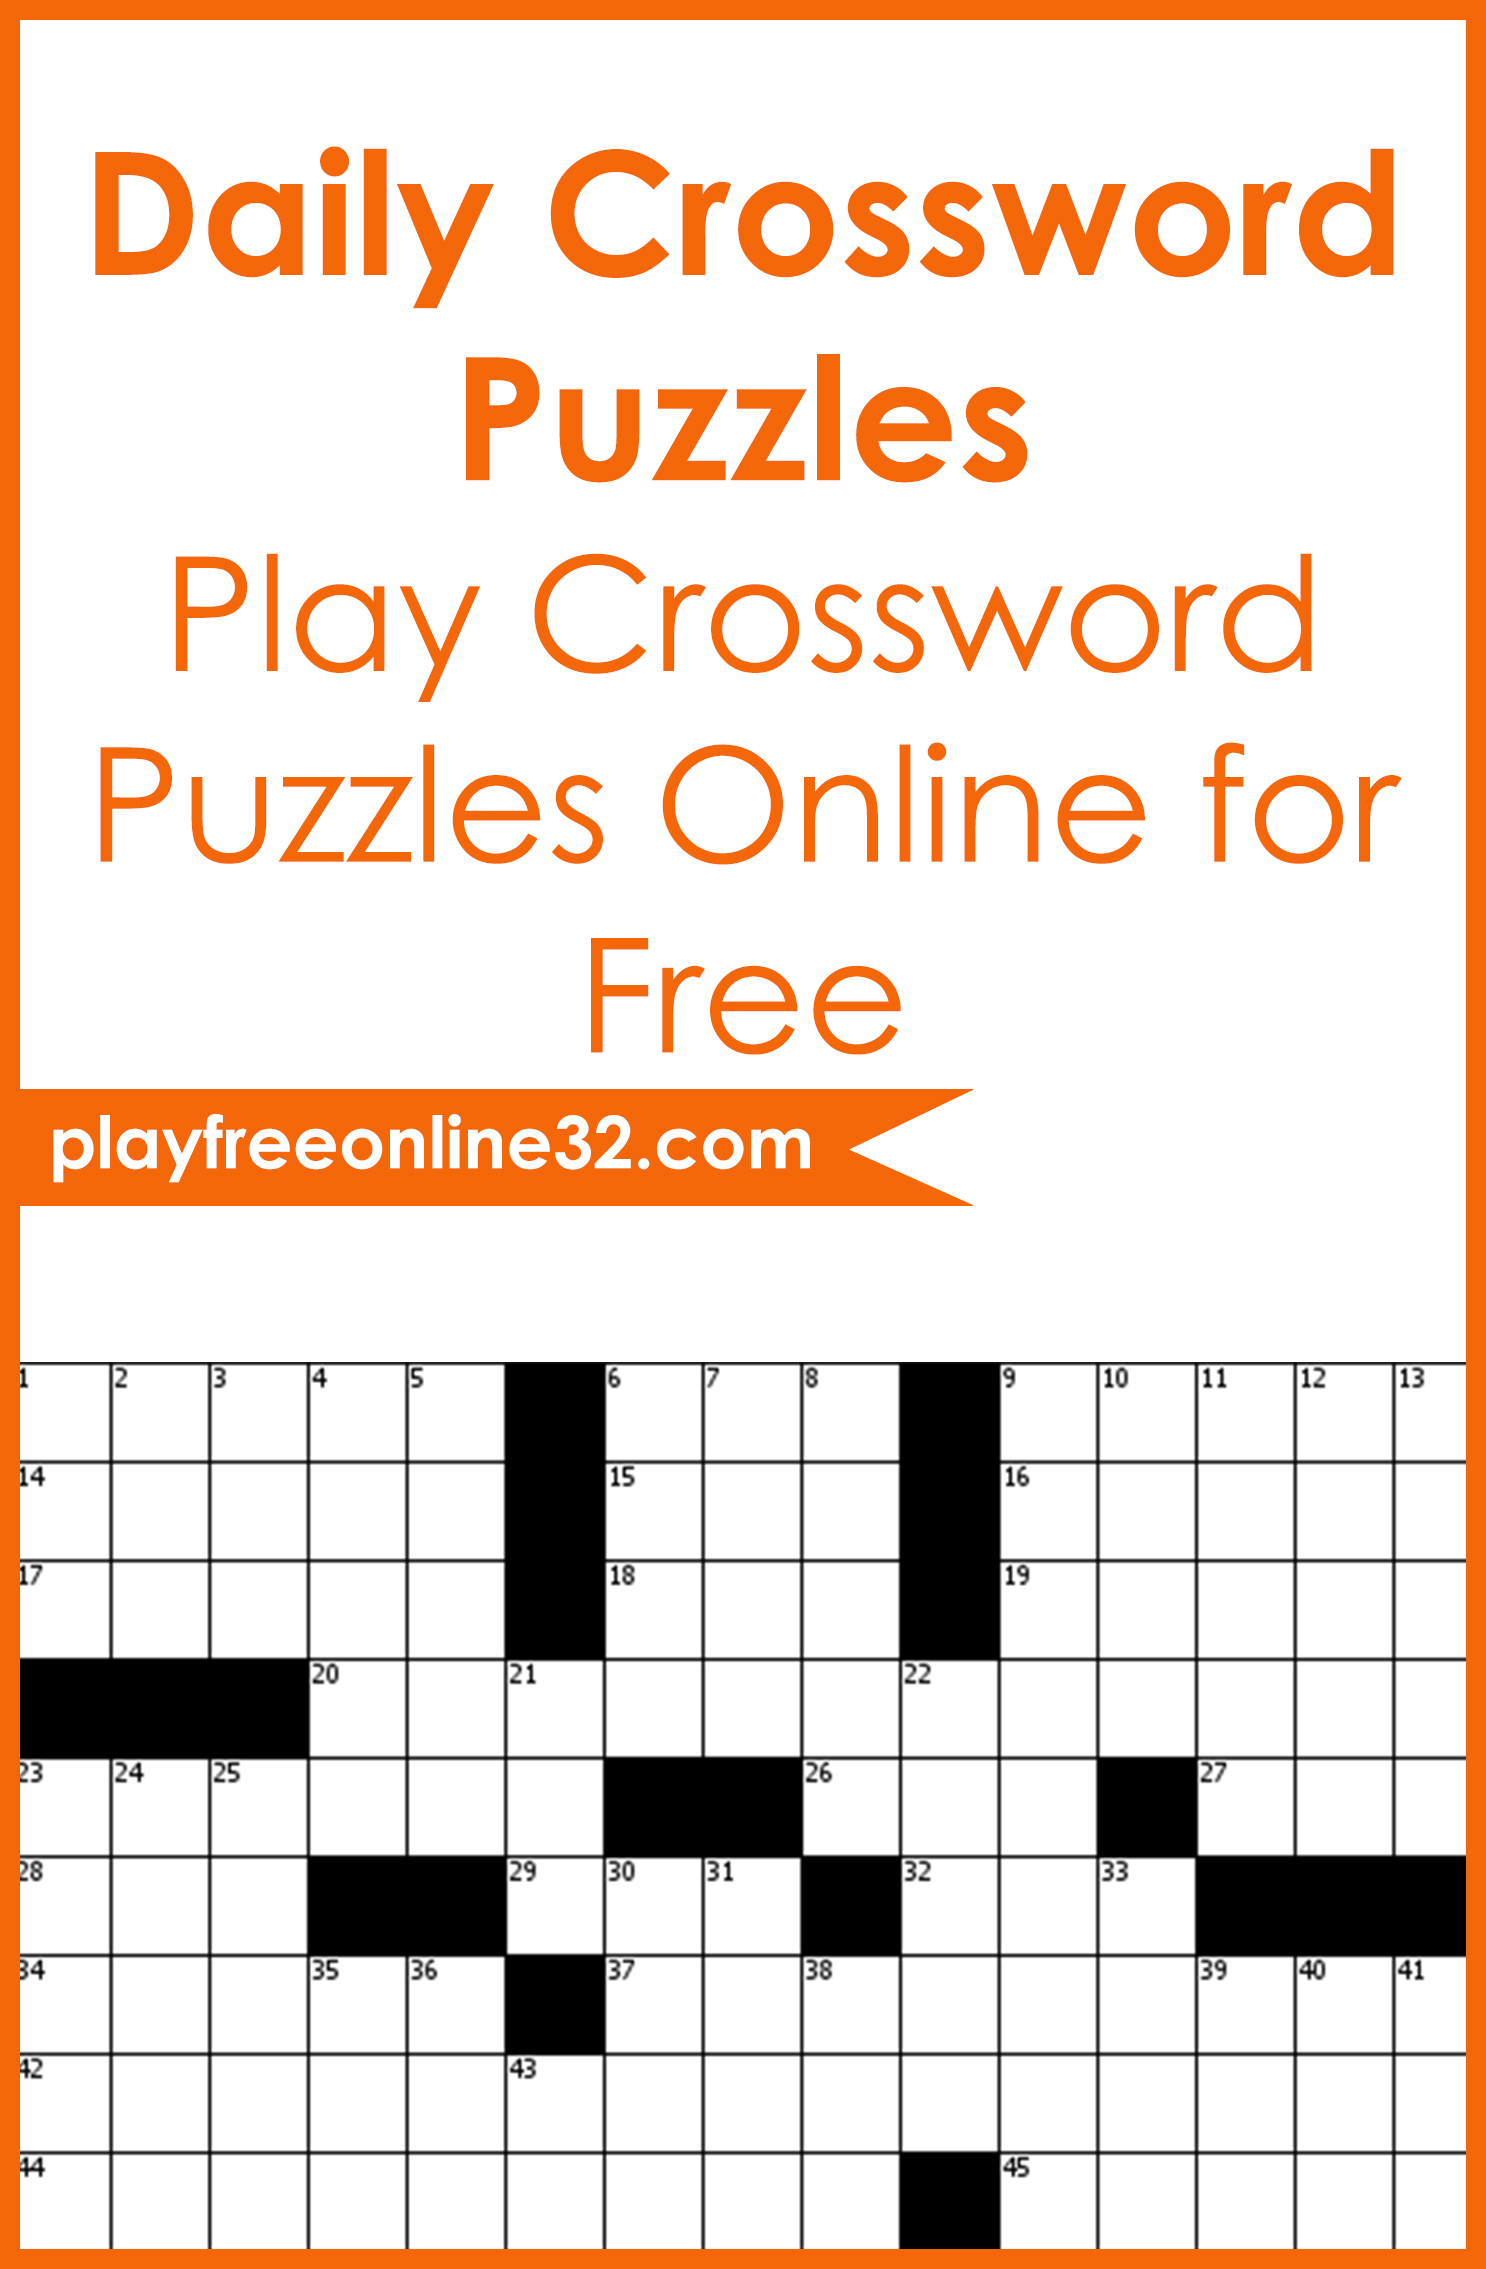 Crossword • Play Daily Crossword Puzzles Online for Free